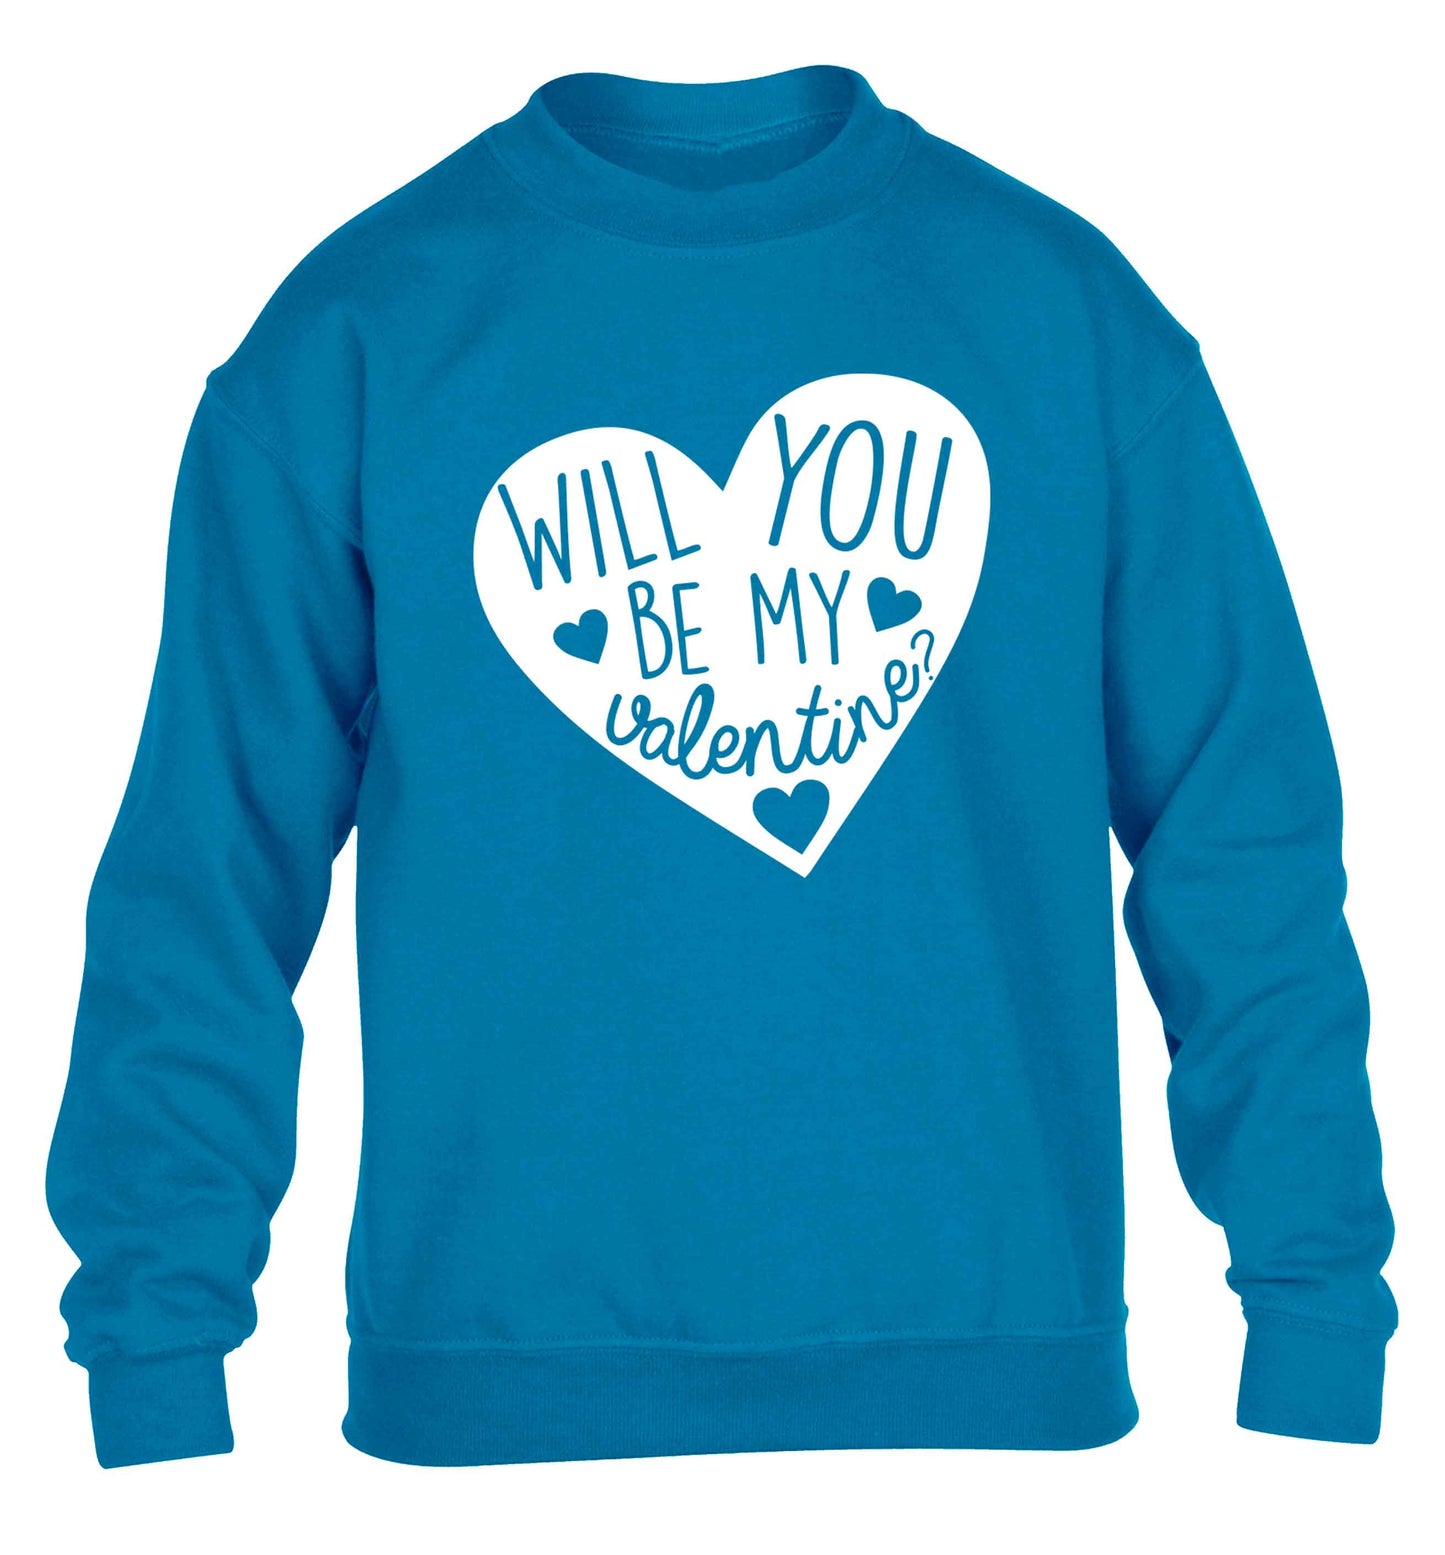 Will you be my valentine? children's blue sweater 12-13 Years